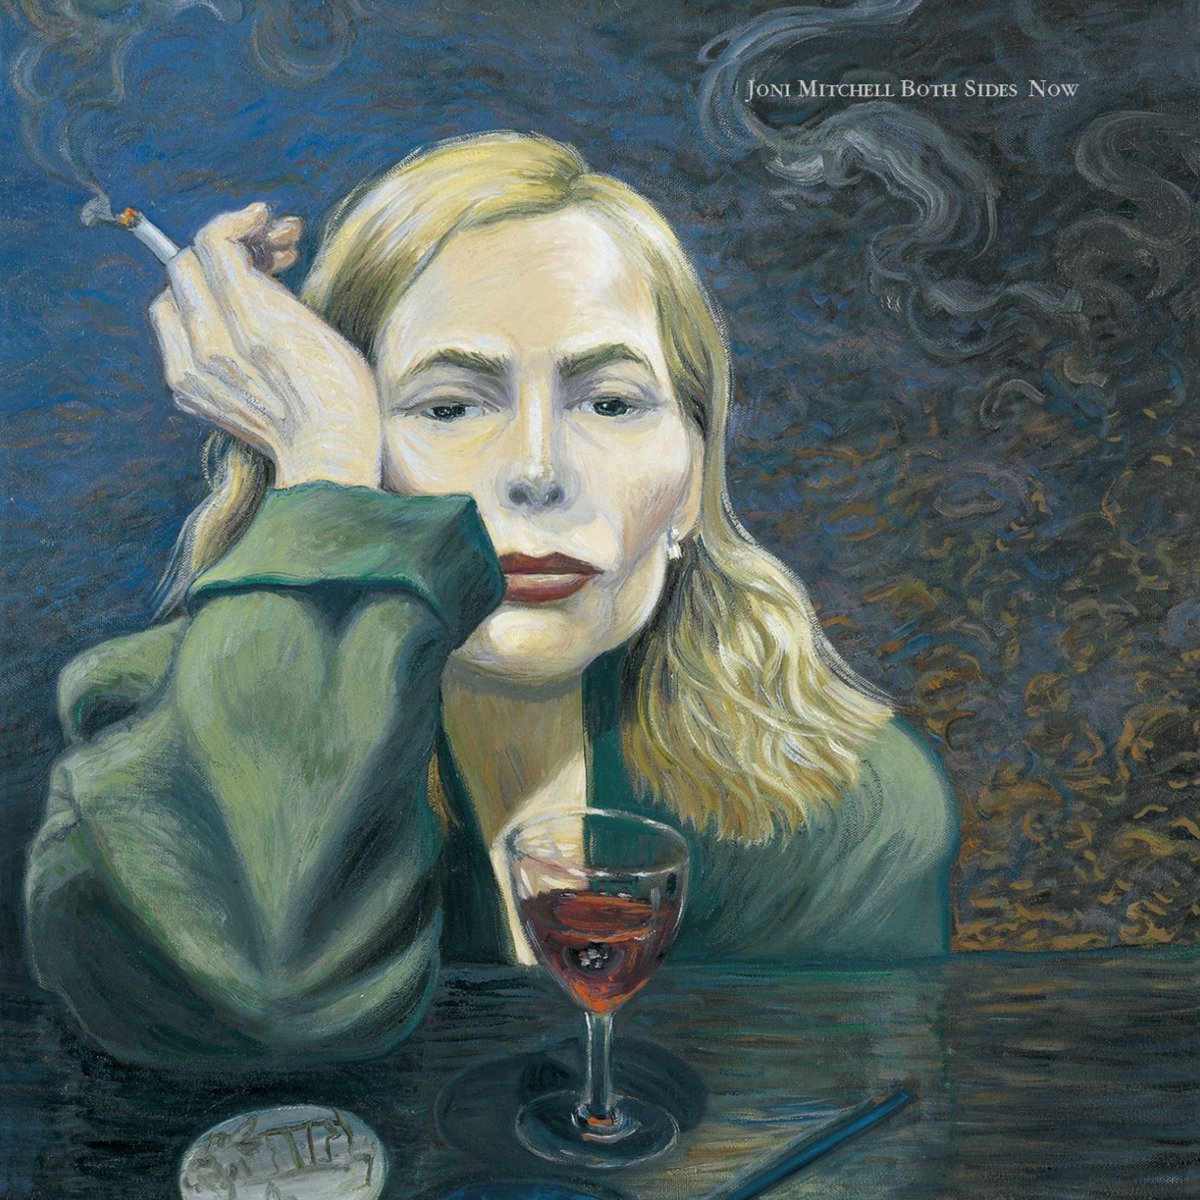 23 years ago today, Joni released her 17th studio album, ‘Both Sides Now.’ The album was arranged to form the narrative of a romantic journey and went on to win two Grammy Awards. Revisit the album here: JM.lnk.to/BSN